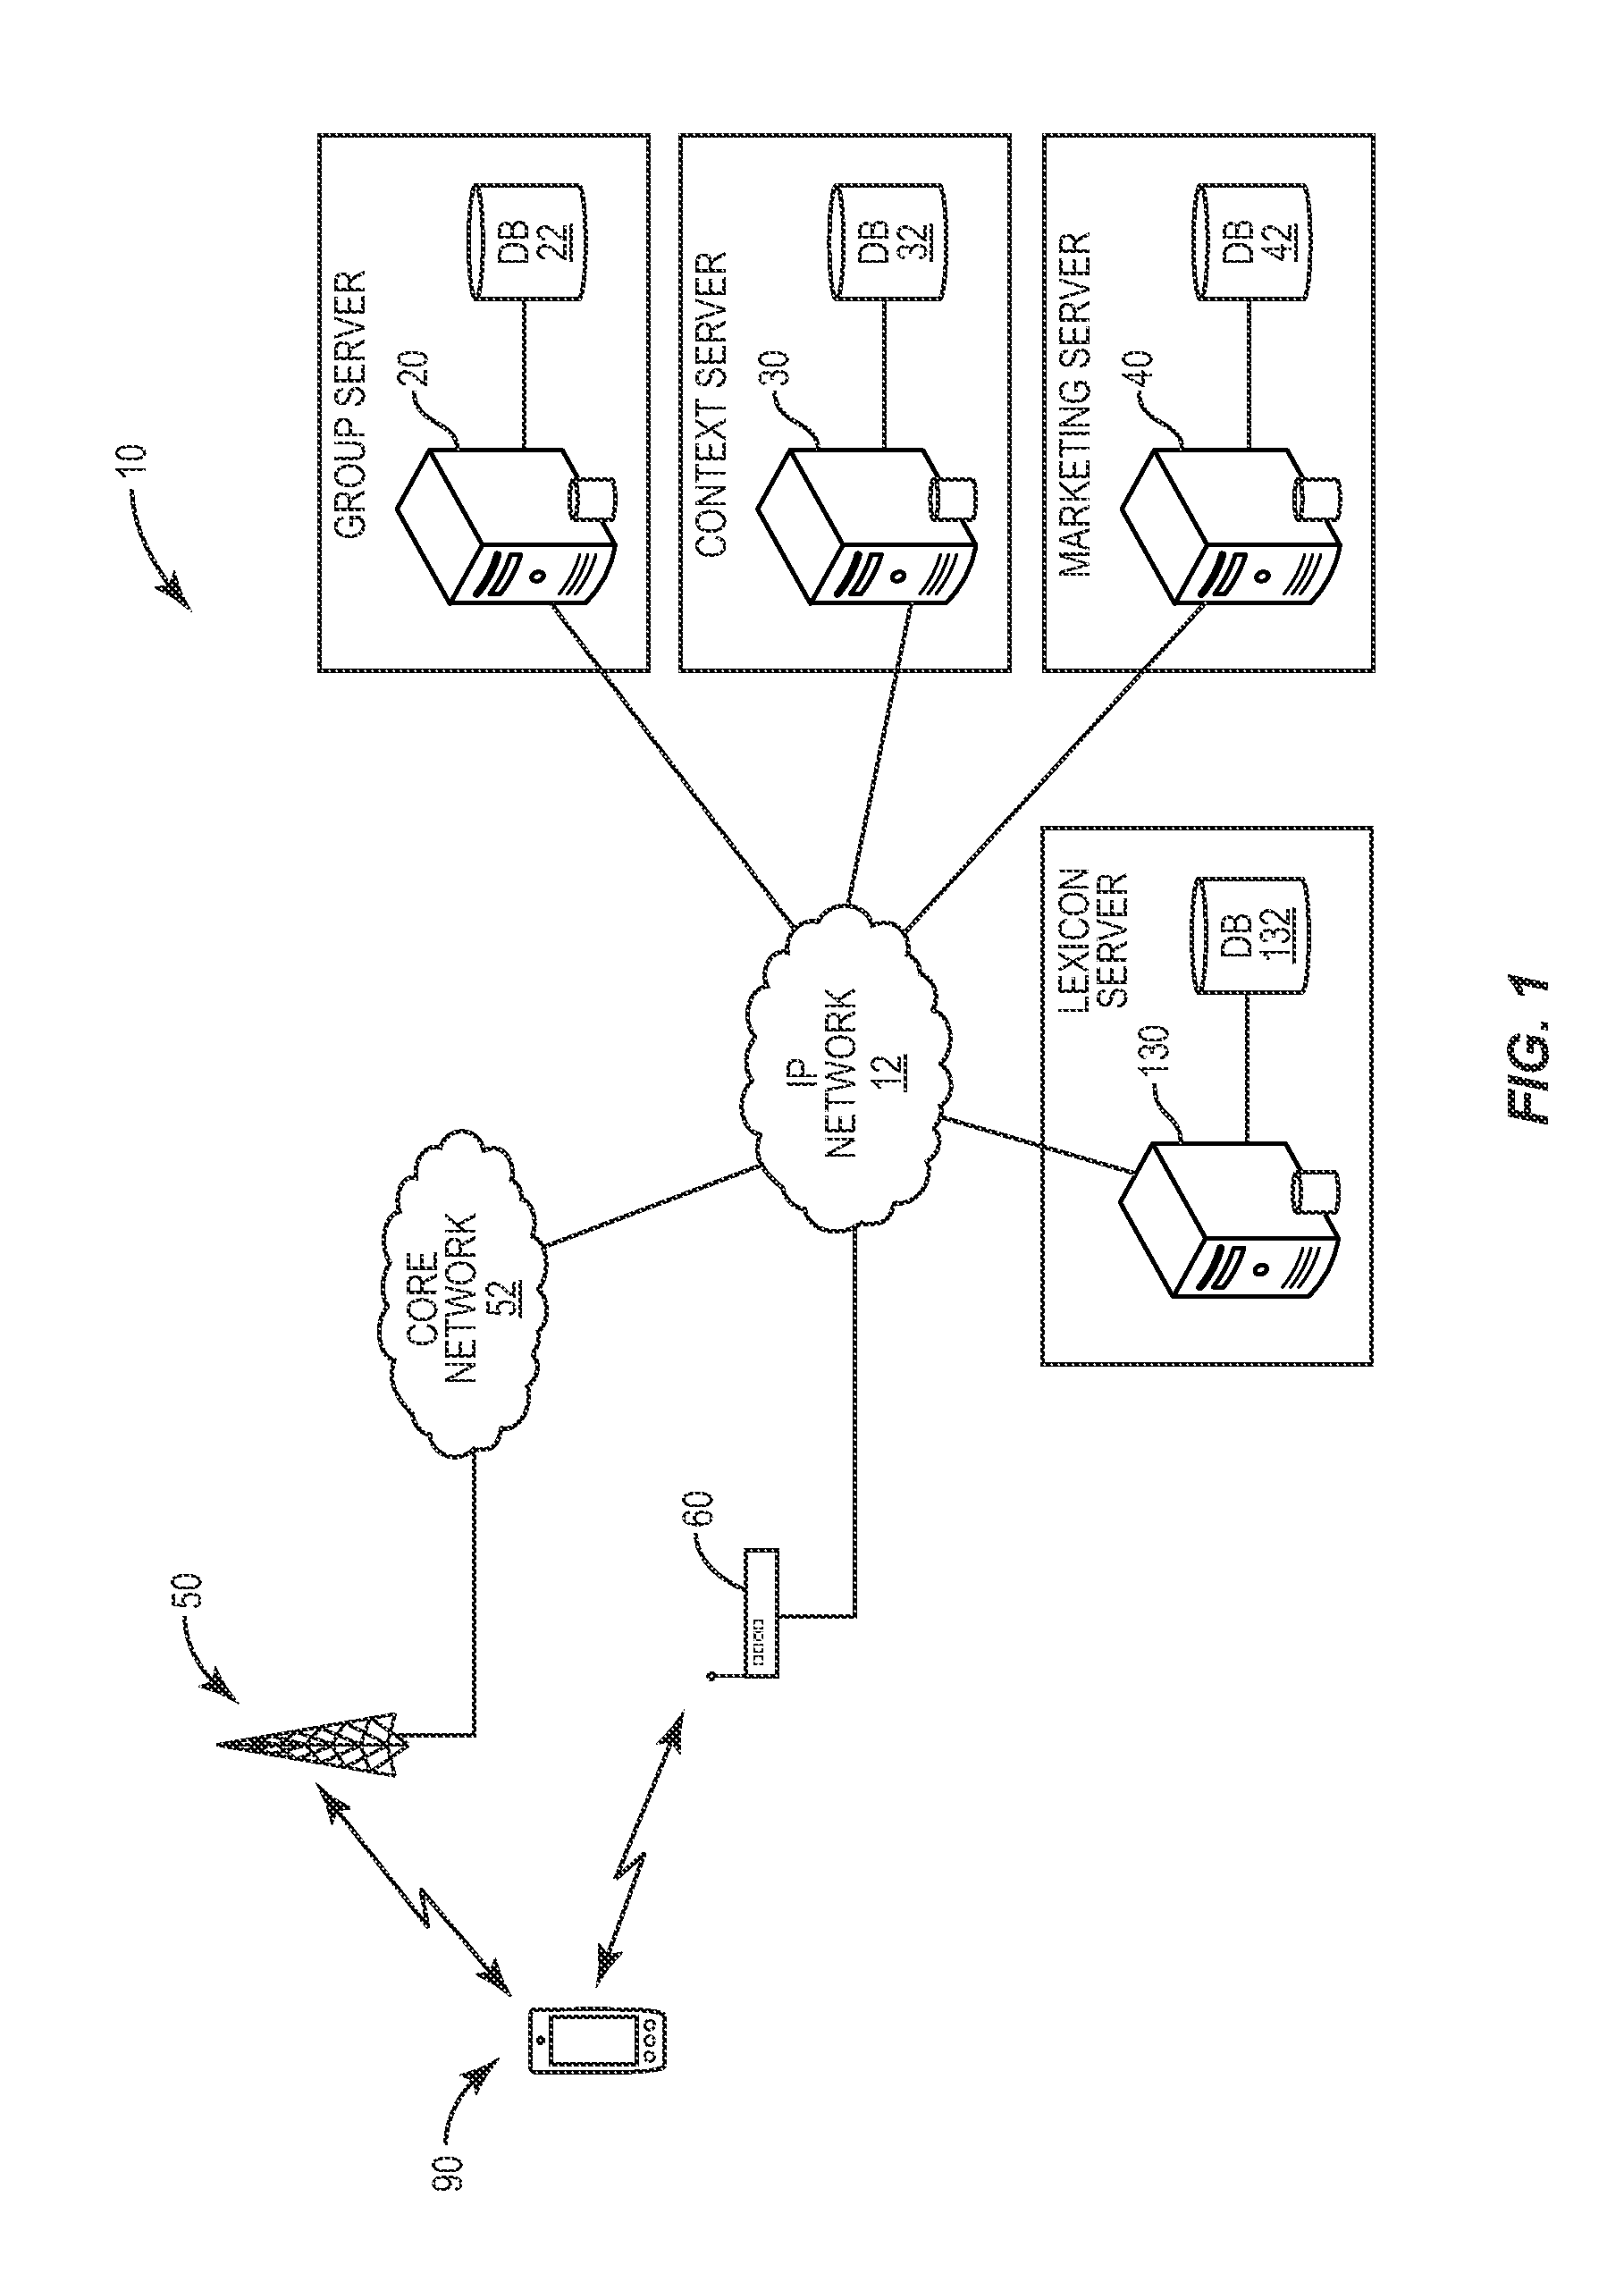 System and method for dynamically generating group-related personalized dictionaries